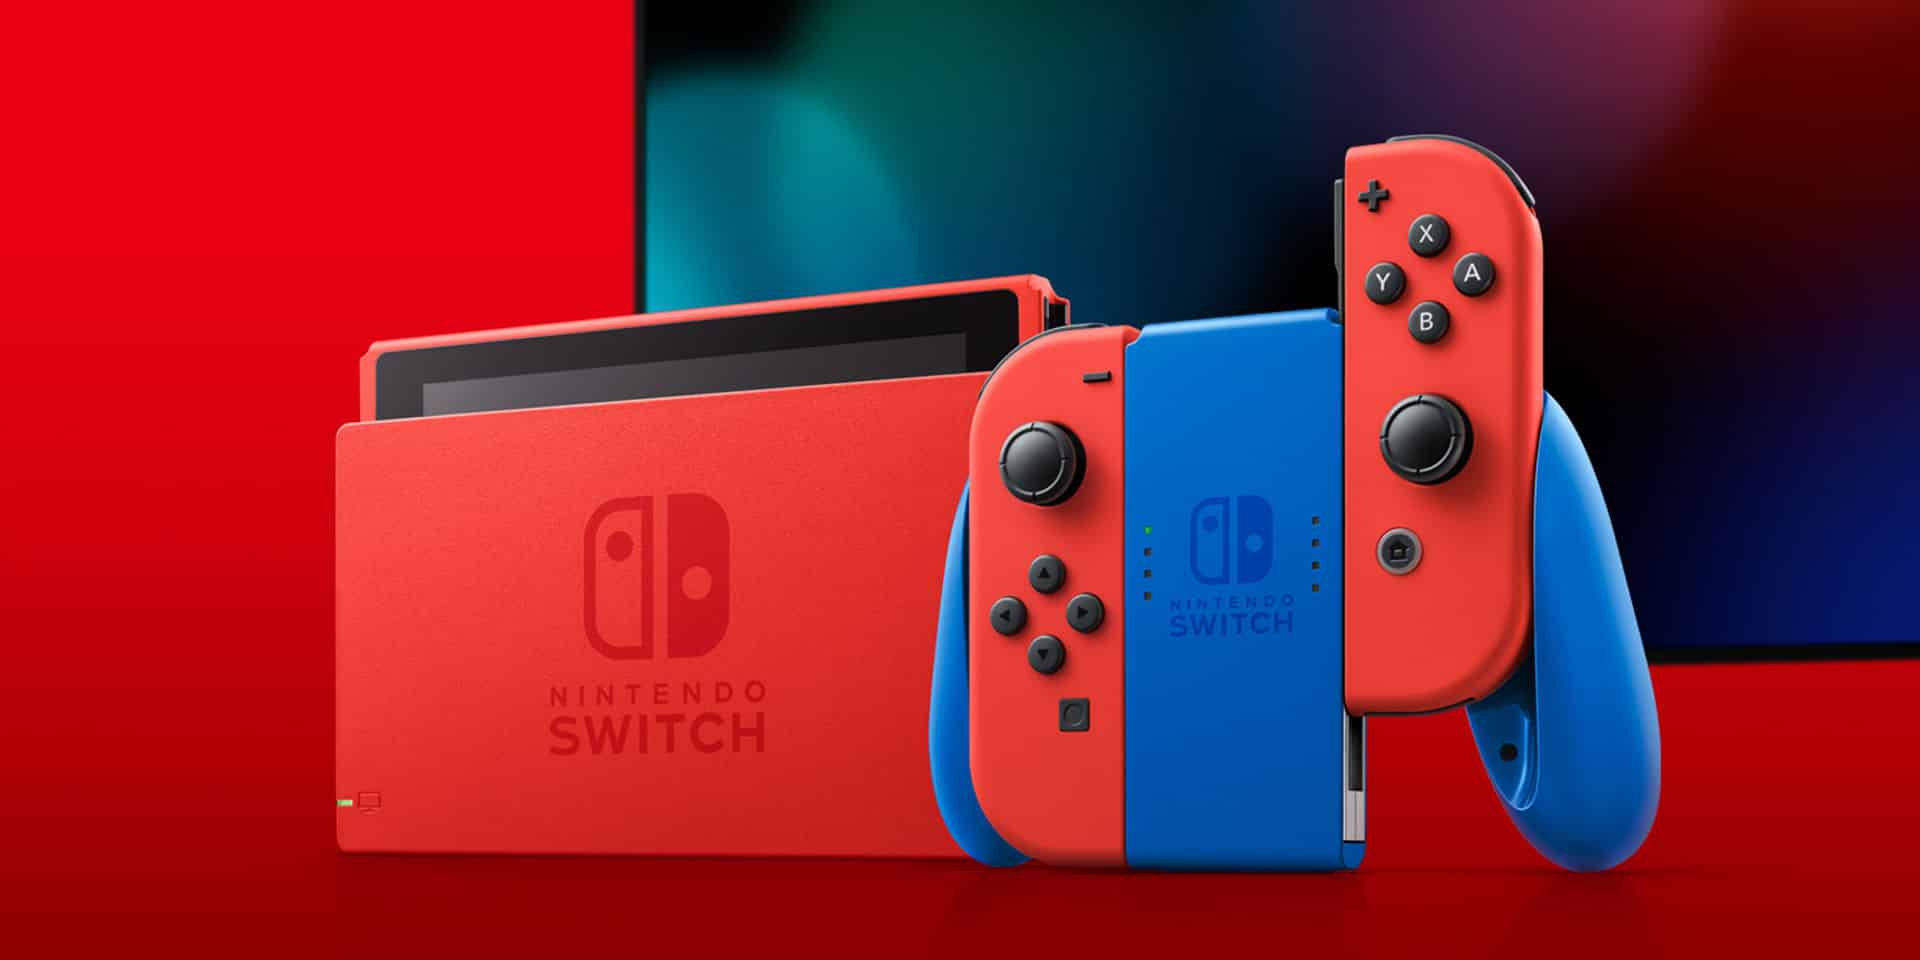 Nintendo Finally Changed The Switch Console Colour With its New Mario Bundle